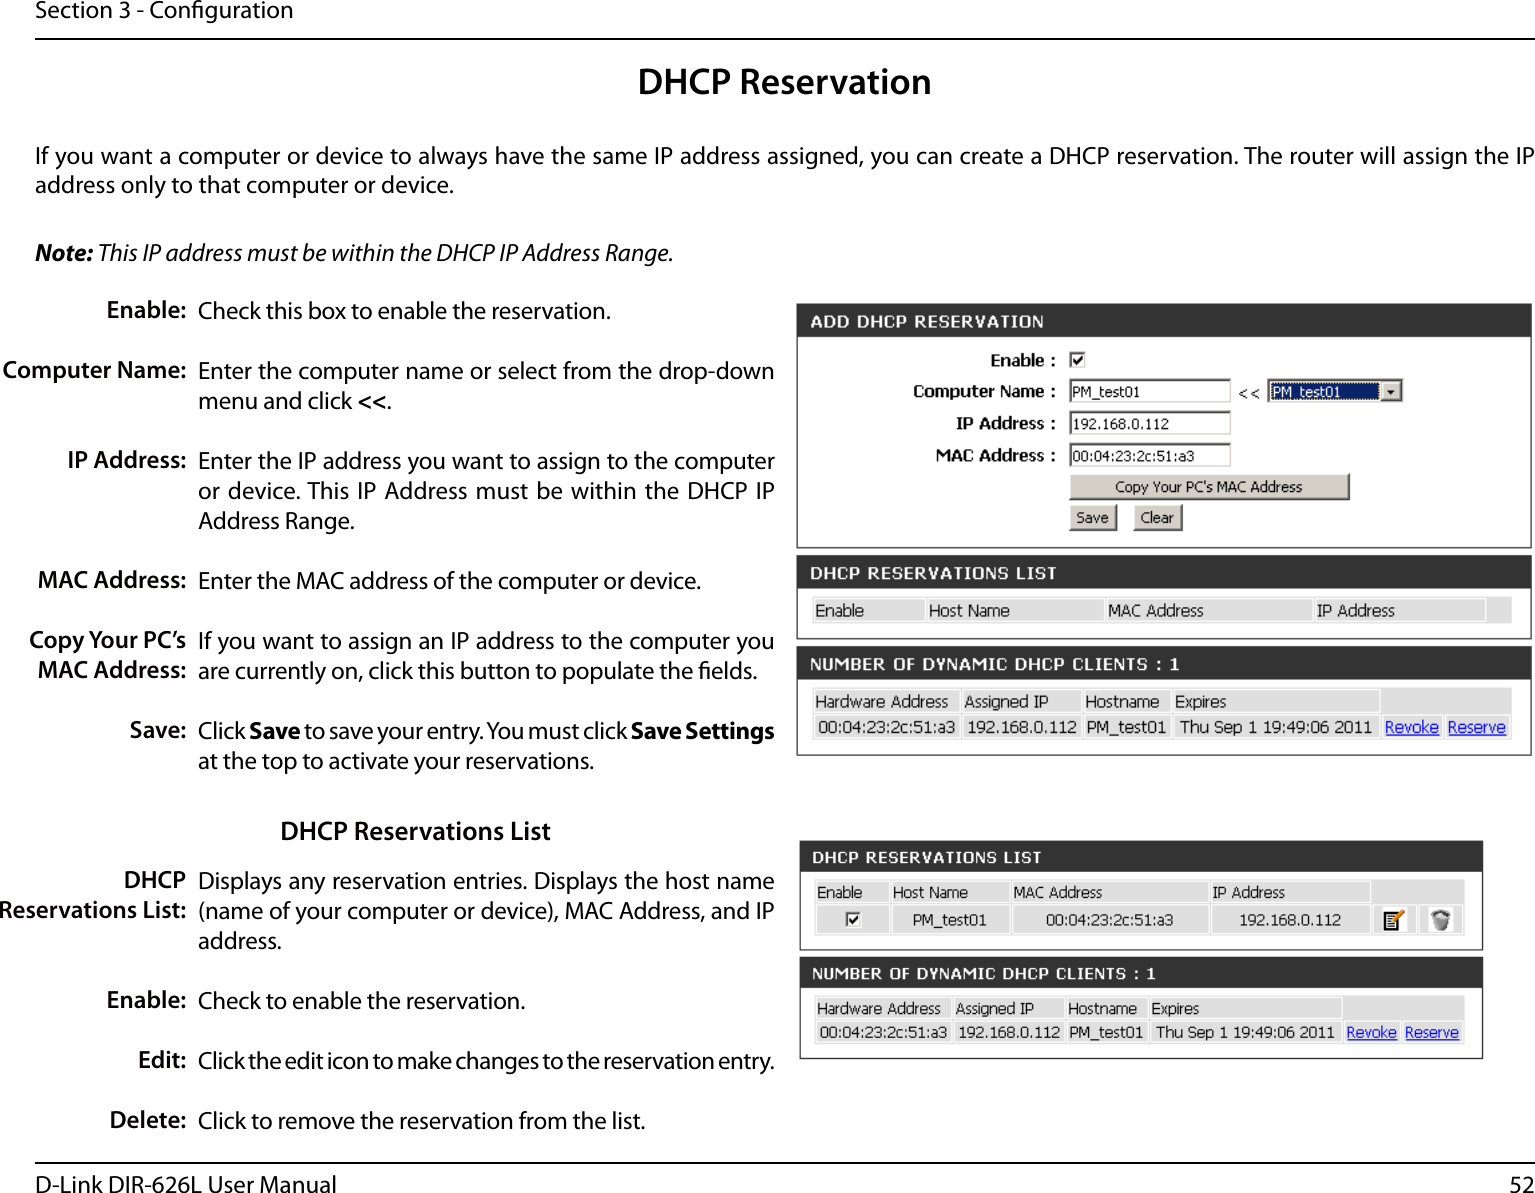 52D-Link DIR-626L User ManualSection 3 - CongurationDHCP ReservationIf you want a computer or device to always have the same IP address assigned, you can create a DHCP reservation. The router will assign the IP address only to that computer or device. Note: This IP address must be within the DHCP IP Address Range.Check this box to enable the reservation.Enter the computer name or select from the drop-down menu and click &lt;&lt;.Enter the IP address you want to assign to the computer or device. This IP Address must  be within the DHCP IP Address Range.Enter the MAC address of the computer or device.If you want to assign an IP address to the computer you are currently on, click this button to populate the elds. Click Save to save your entry. You must click Save Settings at the top to activate your reservations. Displays any reservation entries. Displays the host name (name of your computer or device), MAC Address, and IP address.Check to enable the reservation.Click the edit icon to make changes to the reservation entry.Click to remove the reservation from the list.Enable:Computer Name:IP Address:MAC Address:Copy Your PC’s MAC Address:Save:DHCP Reservations List:Enable:Edit:Delete:DHCP Reservations List